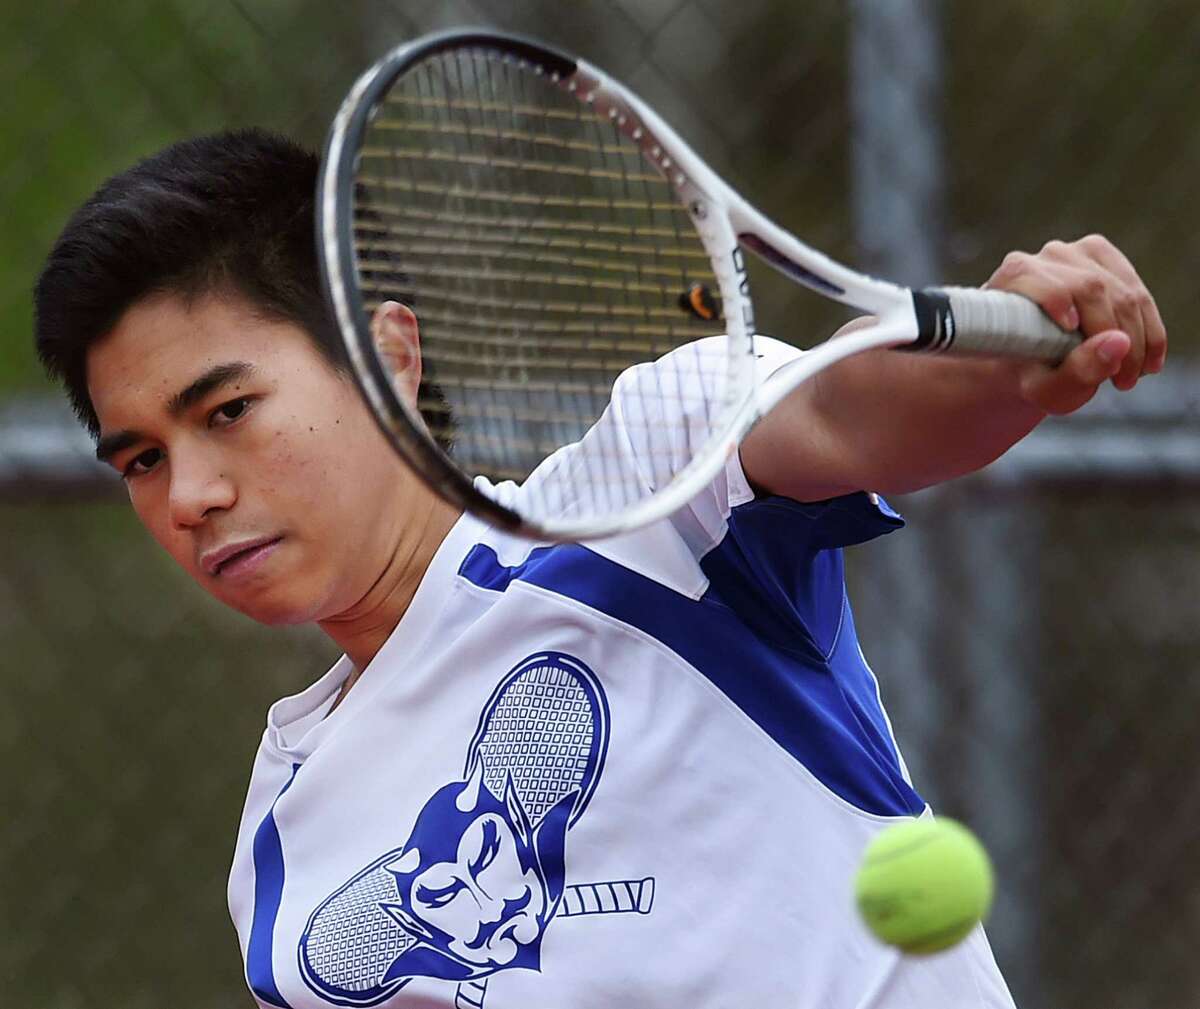 James Delgado, a sophomore, at practice, Friday, April 29, 2016, at the courts at Painter Park in West Haven is the no. 2 seed single player at West Haven High School. (Catherine Avalone/New Haven Register)